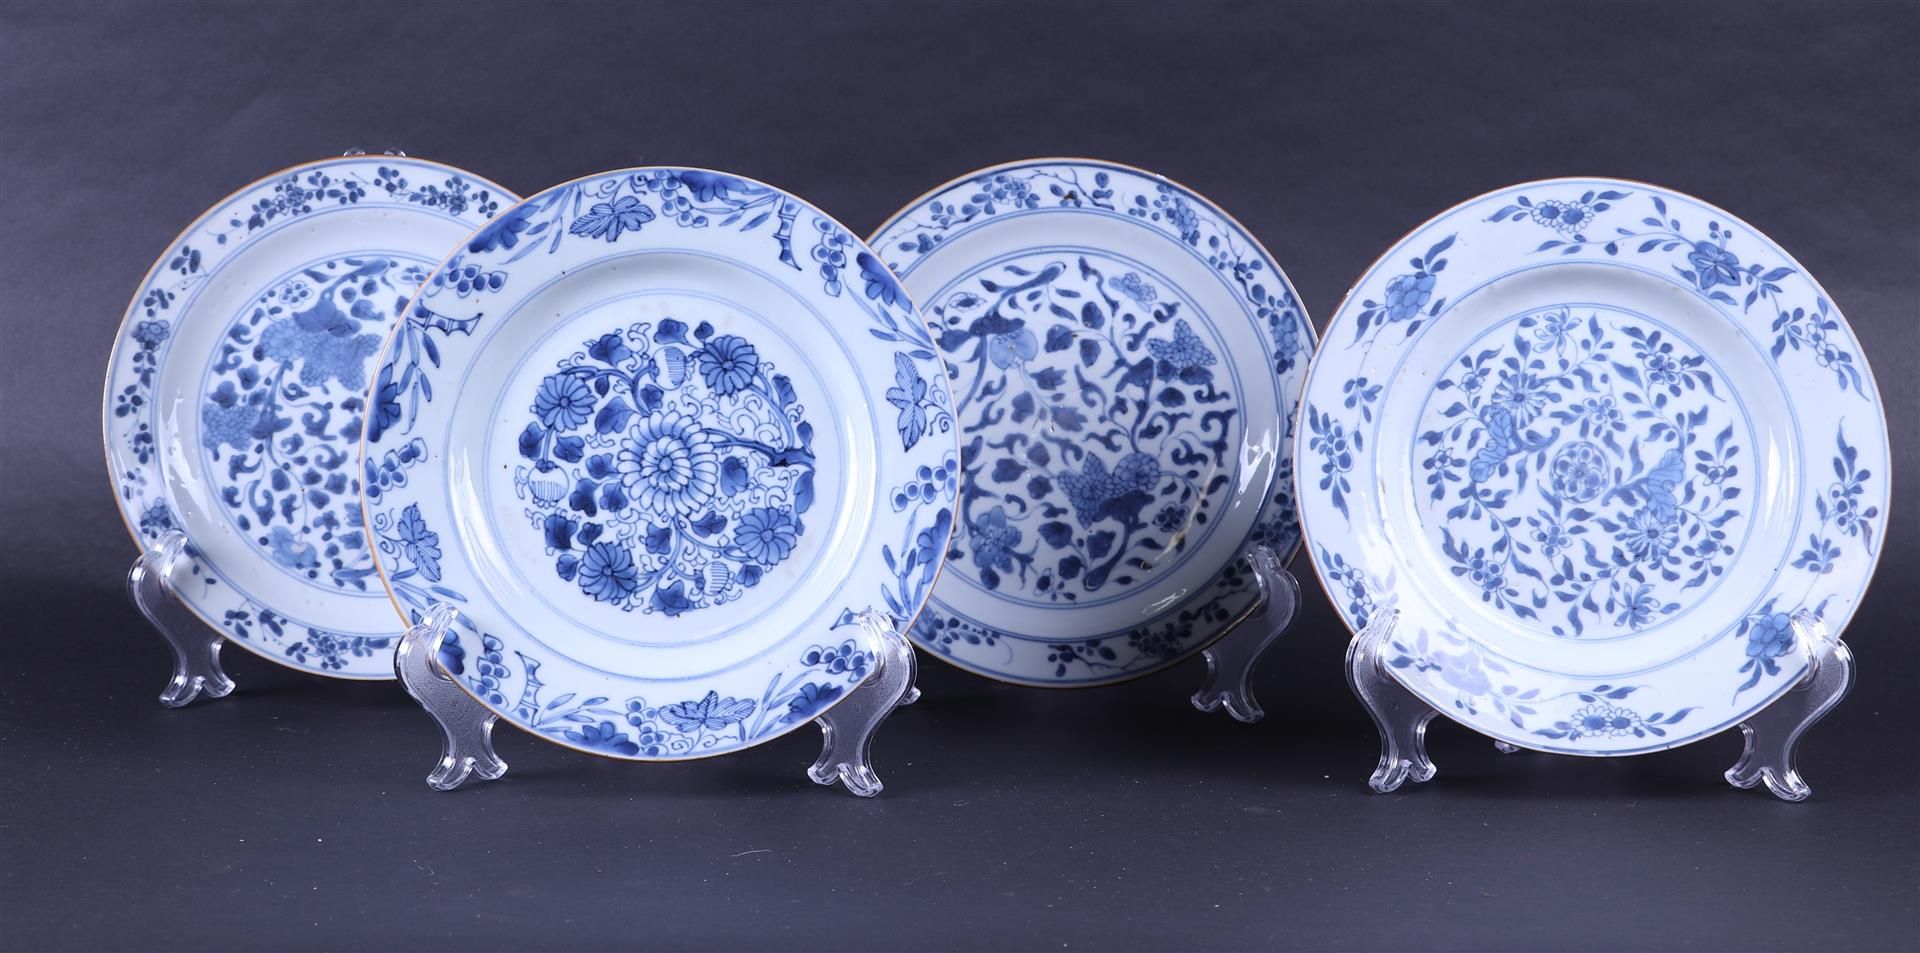 A lot of four porcelain plates with a floral decor. China, 18th century.